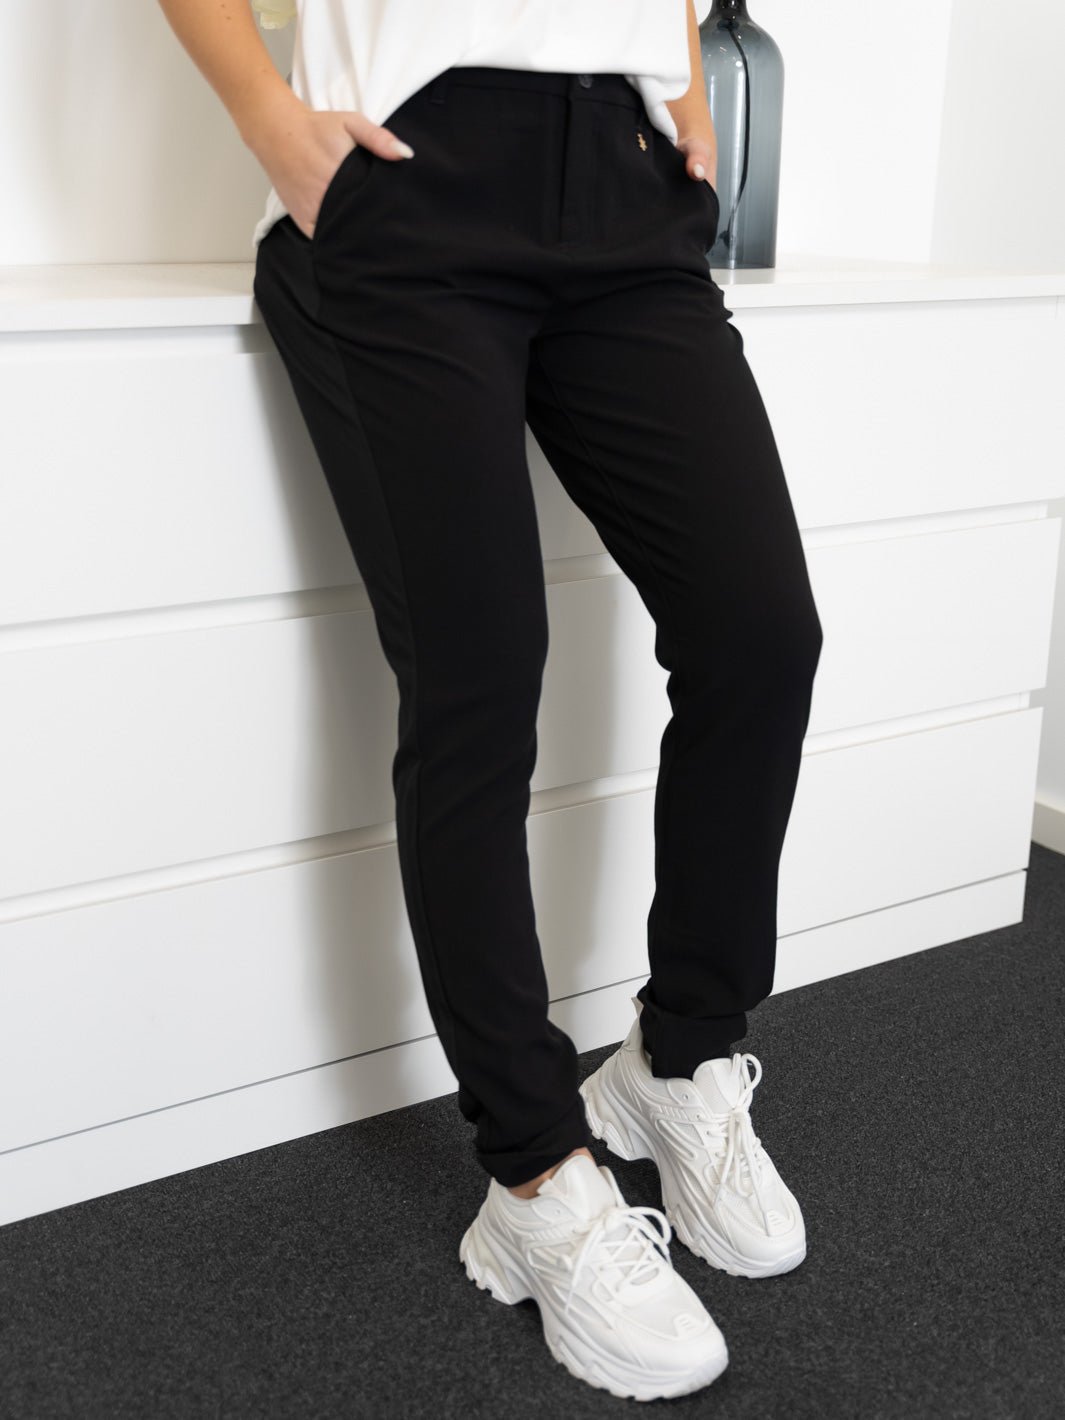 Culture CUvicky pants black - Online-Mode